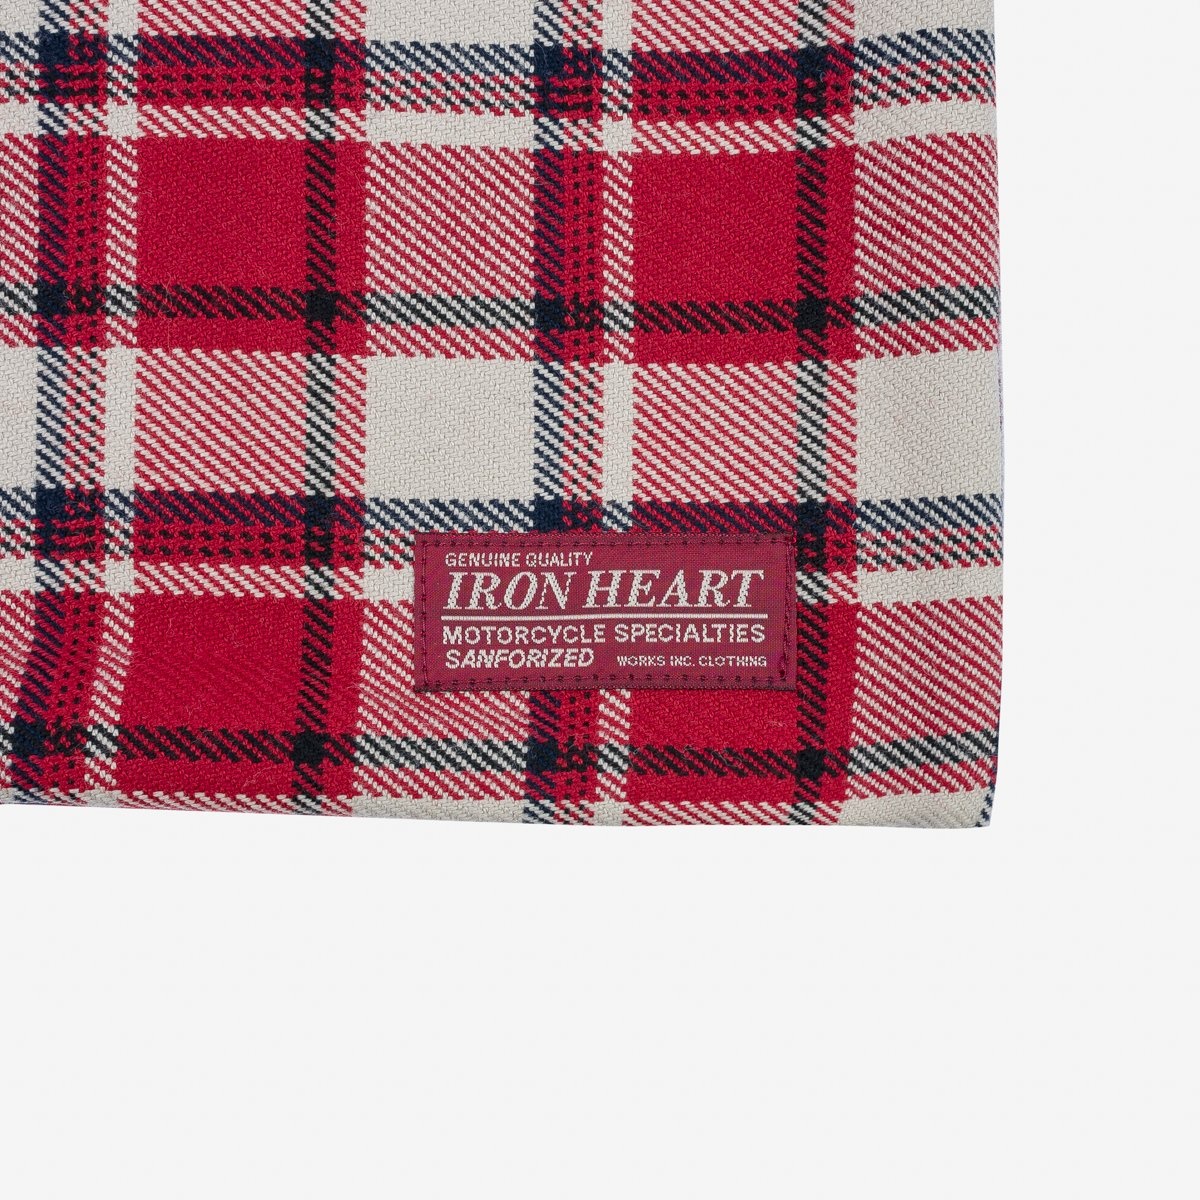 IHG-103-REDCRM Ultra Heavy Flannel Classic Check Cushion Cover - Red/Cream - 2